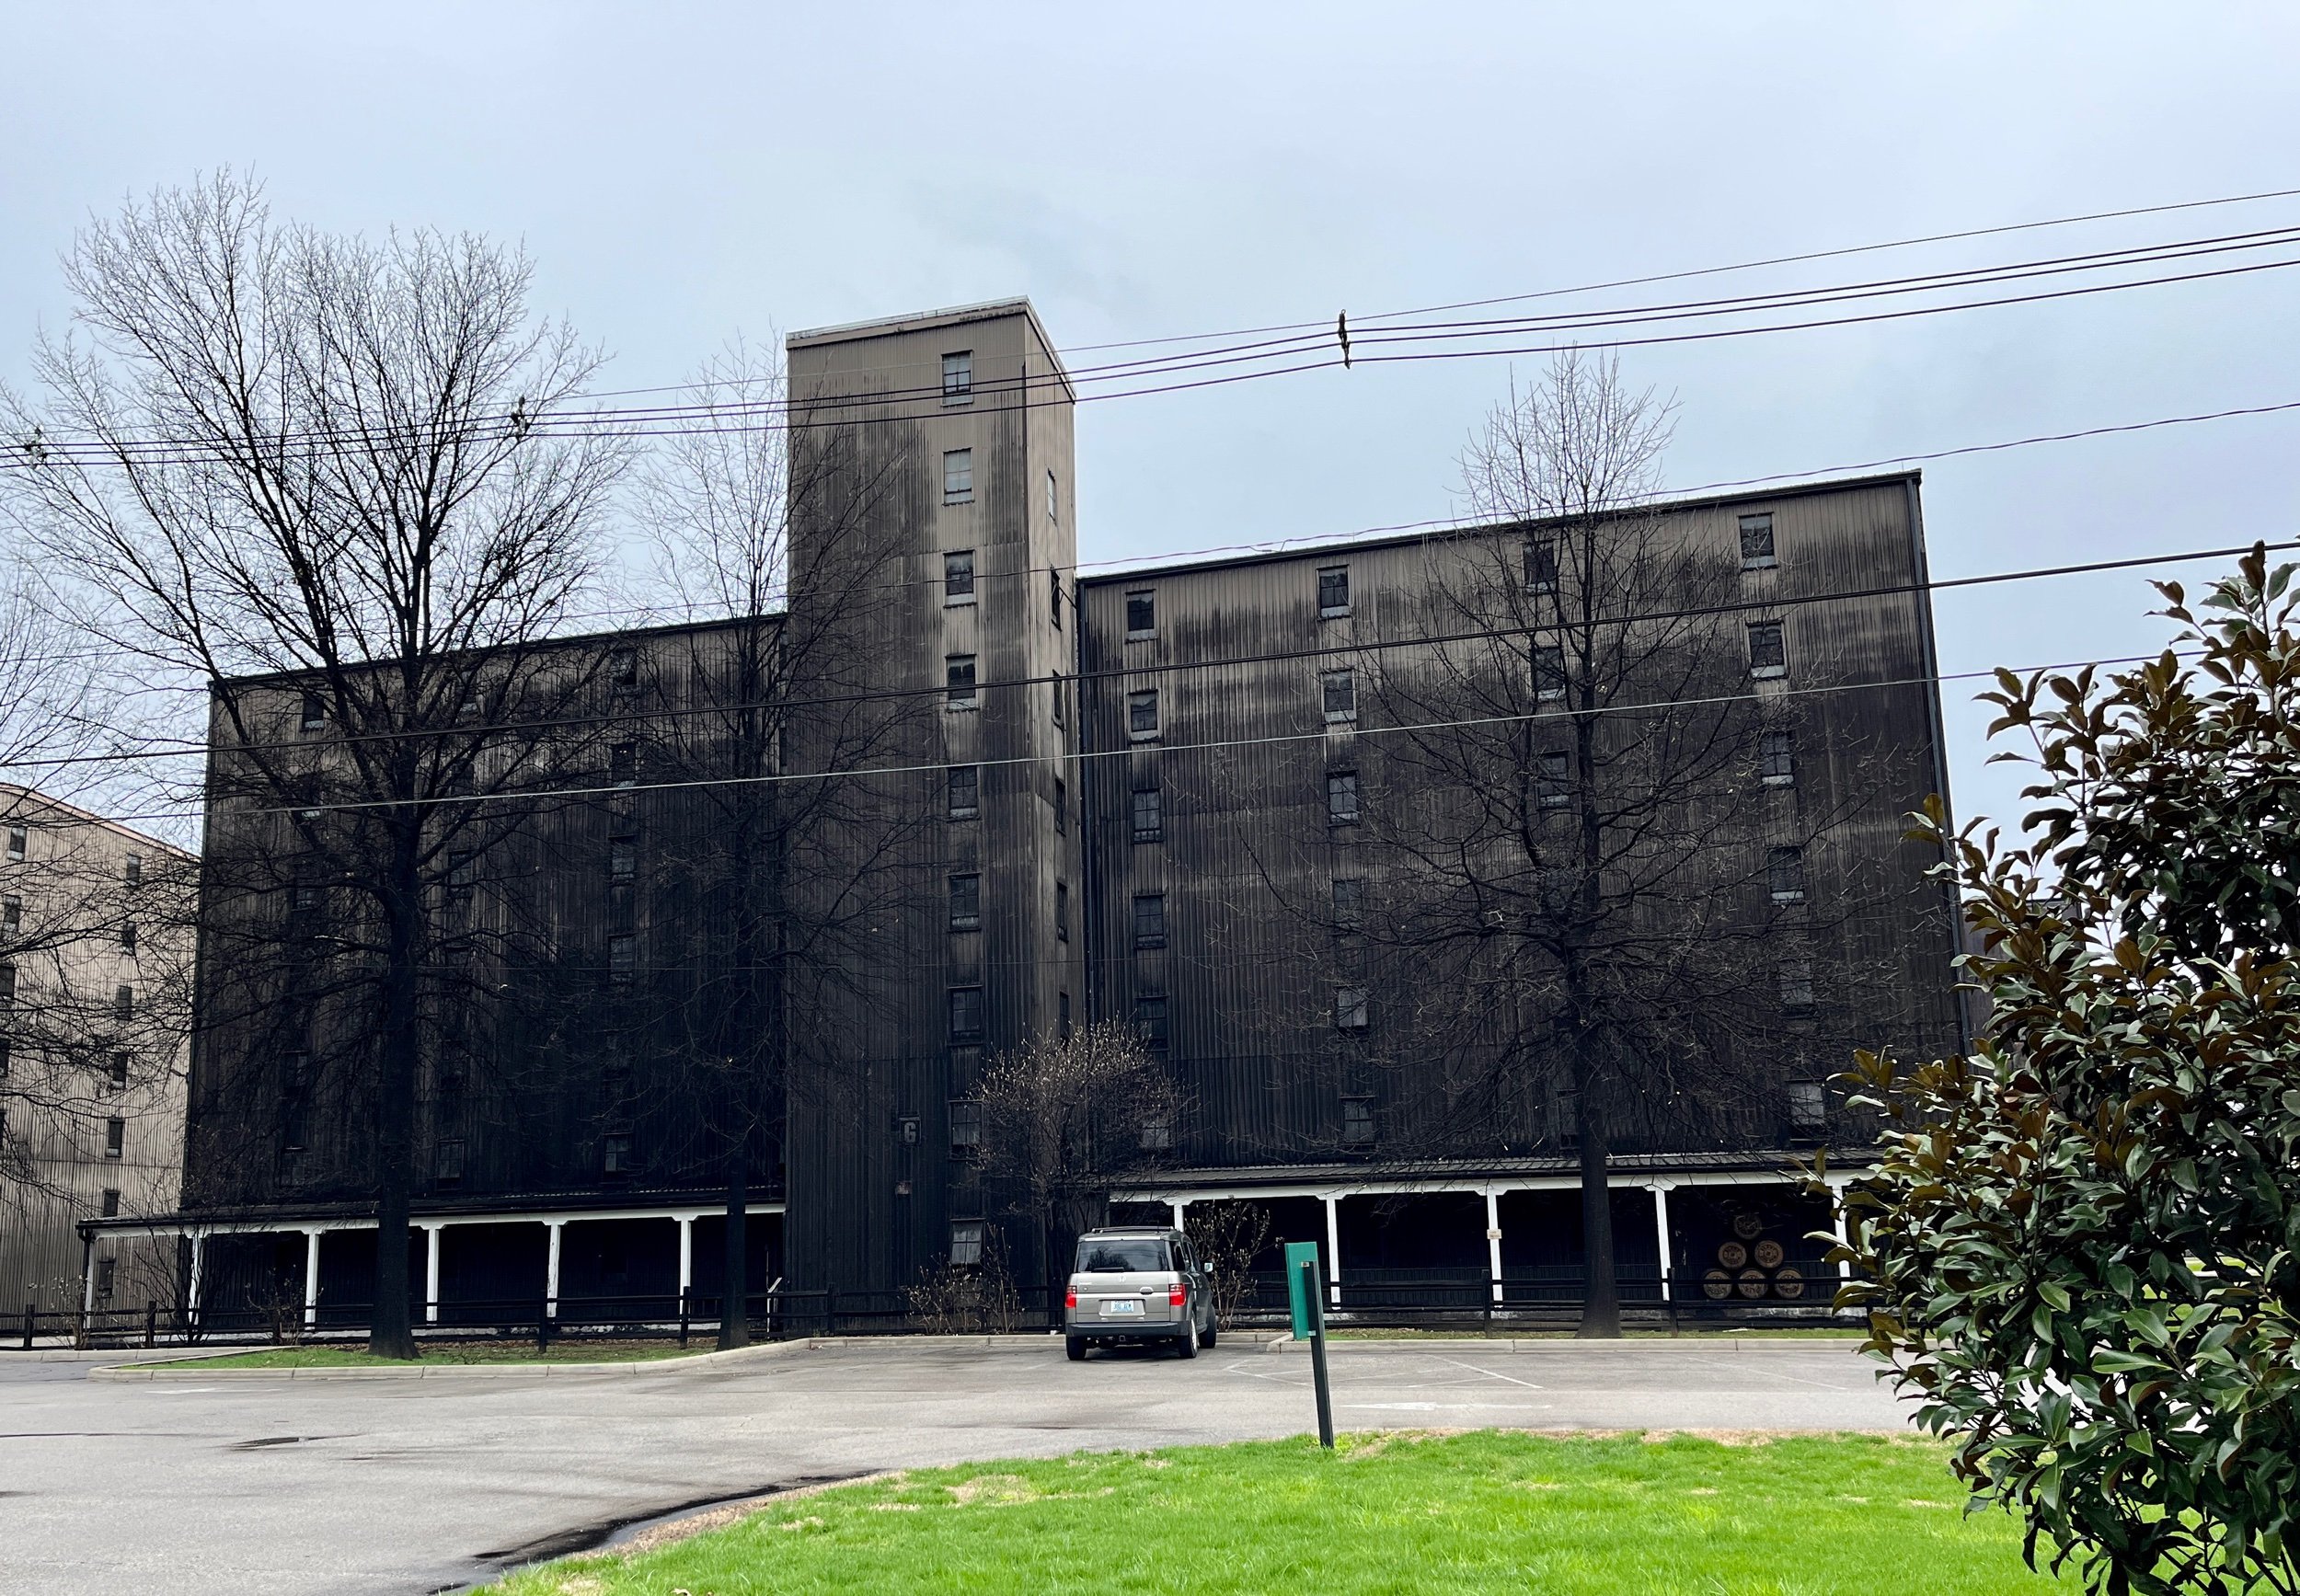  The building is covered in a black fungus that grows in the vicinity of distilleries. Nicknamed the tattletale fungus, it was easy for law enforcement to find illegal alcohol production during Prohibition. 